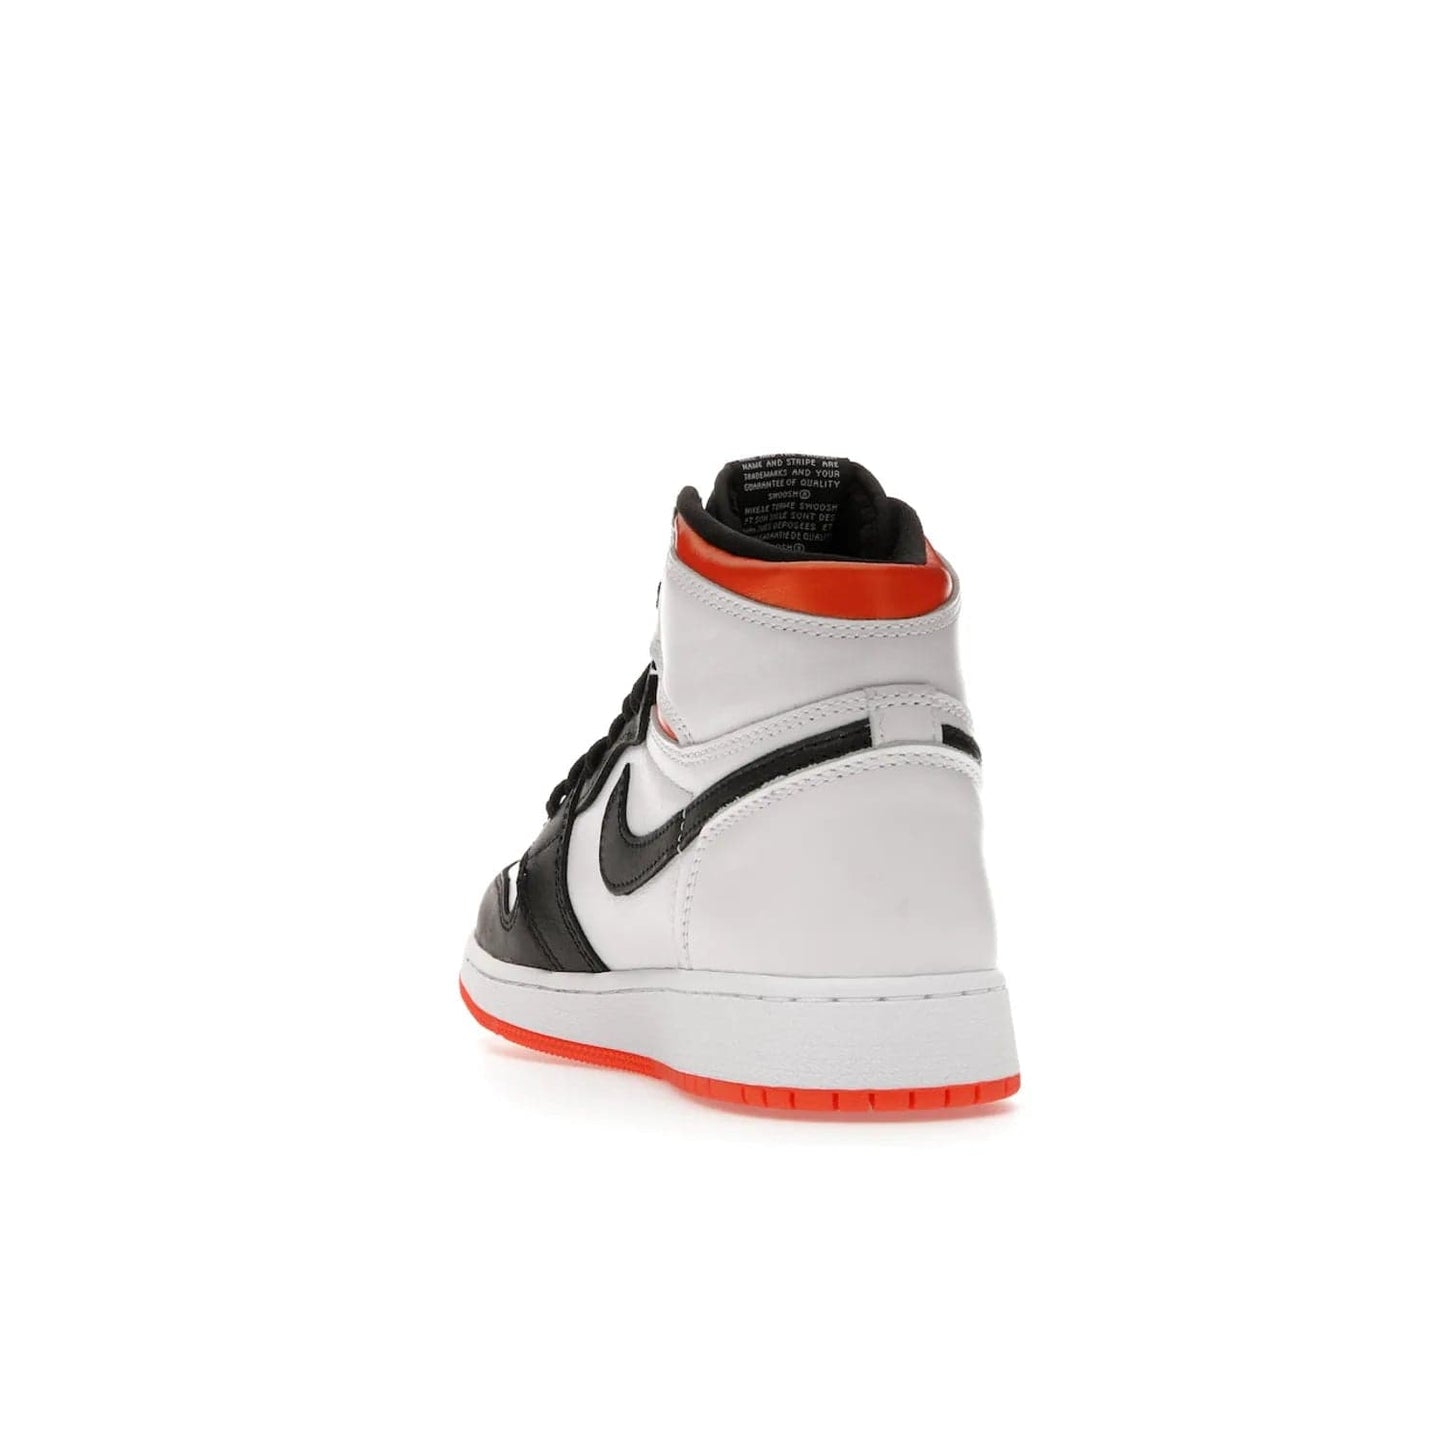 Jordan 1 High OG Electro Orange (GS) - Image 26 - Only at www.BallersClubKickz.com - The Air Jordan 1 High OG Electro Orange GS is the ideal shoe for kids on the go. Featuring white leather uppers, black overlays, and bright orange accents, it's sure to become a favorite. A great mix of classic style and vibrant colors, the shoe delivers air cushioning for comfort and hard orange rubber for grip. Release on July 17th, 2021. Get them a pair today.